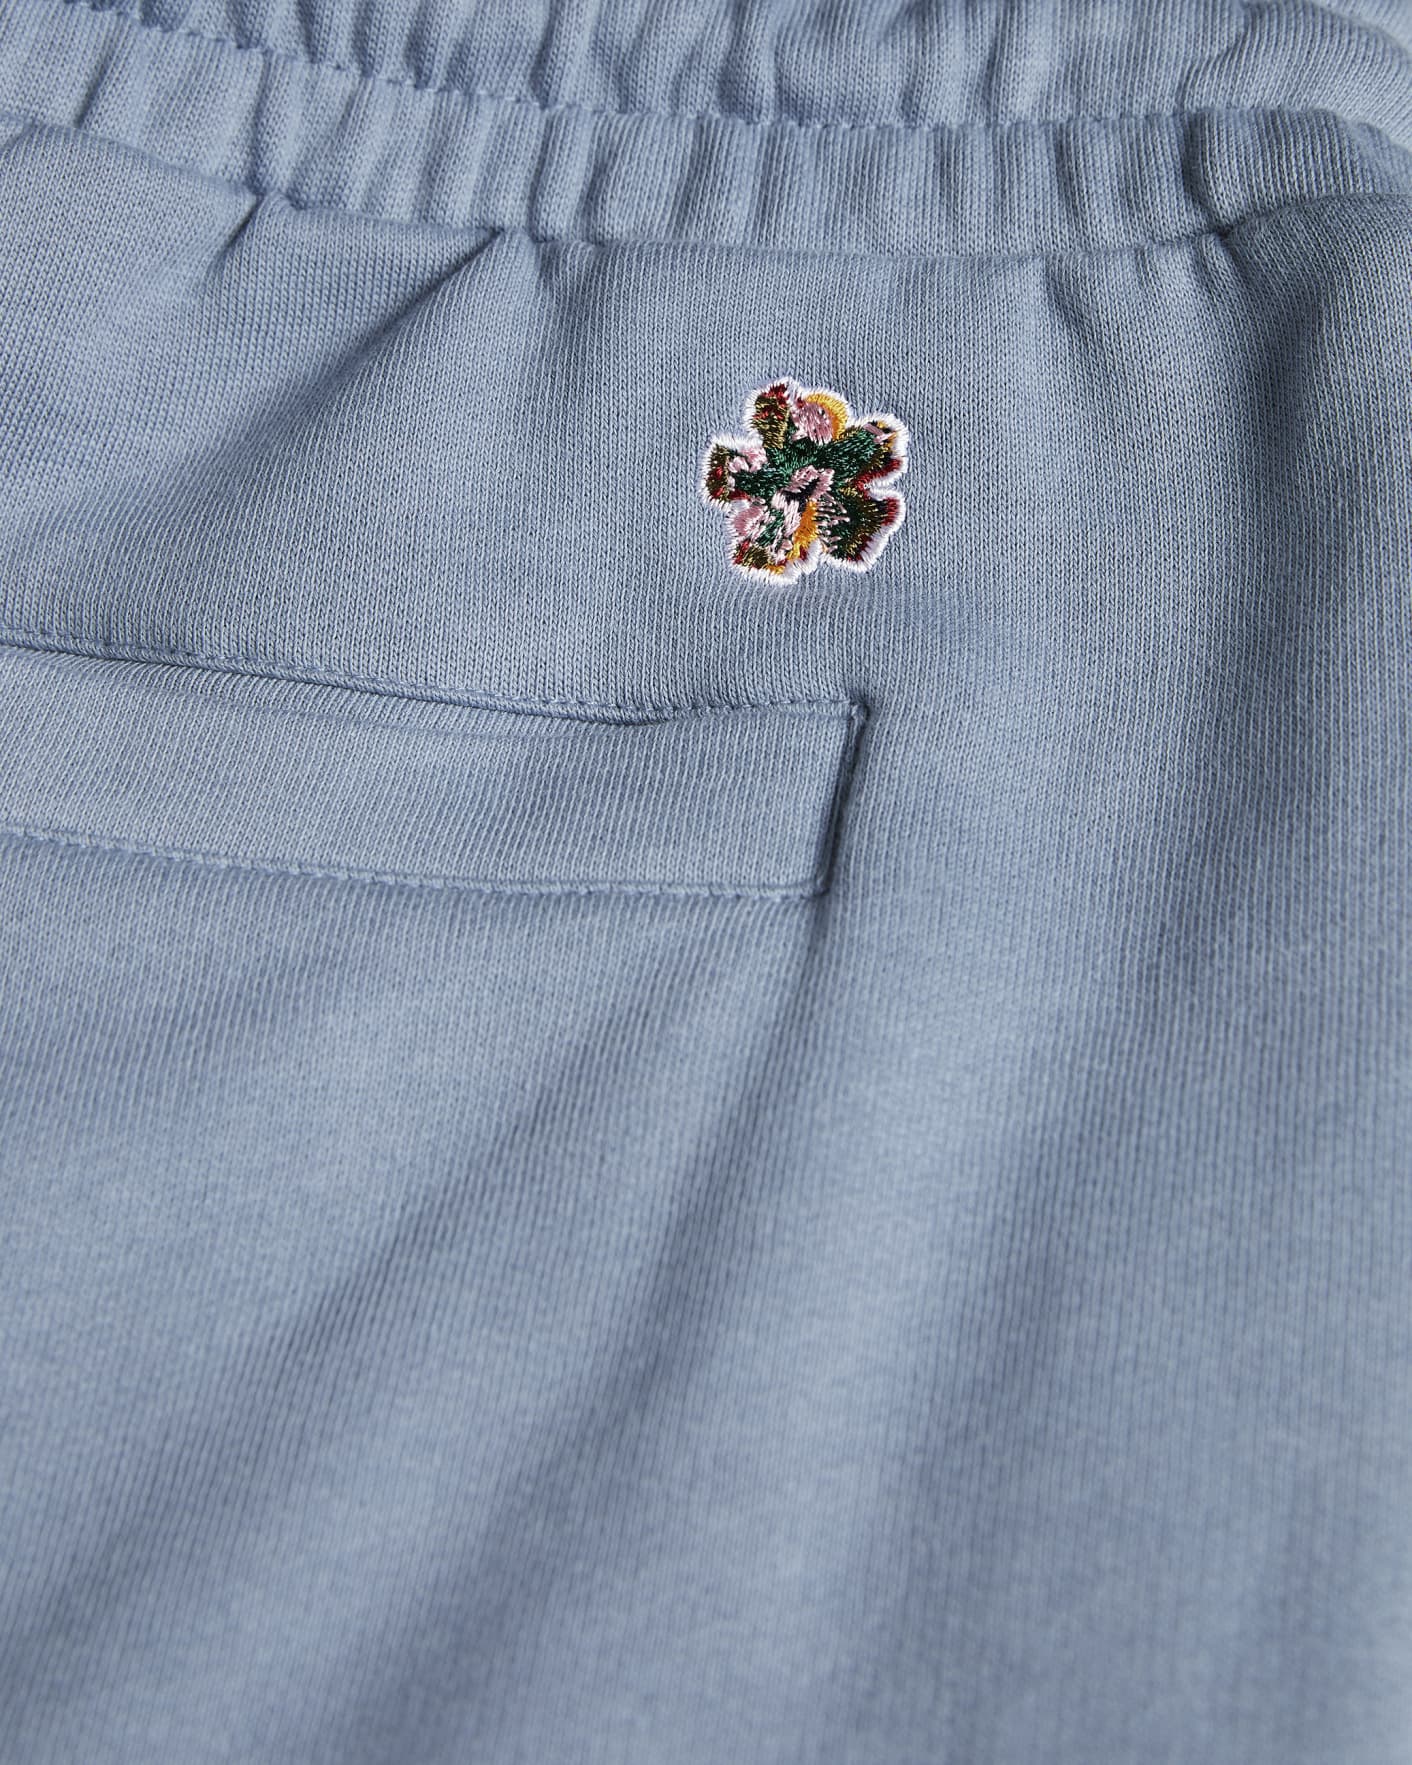 Light Blue Jersey Joggers Ted Baker